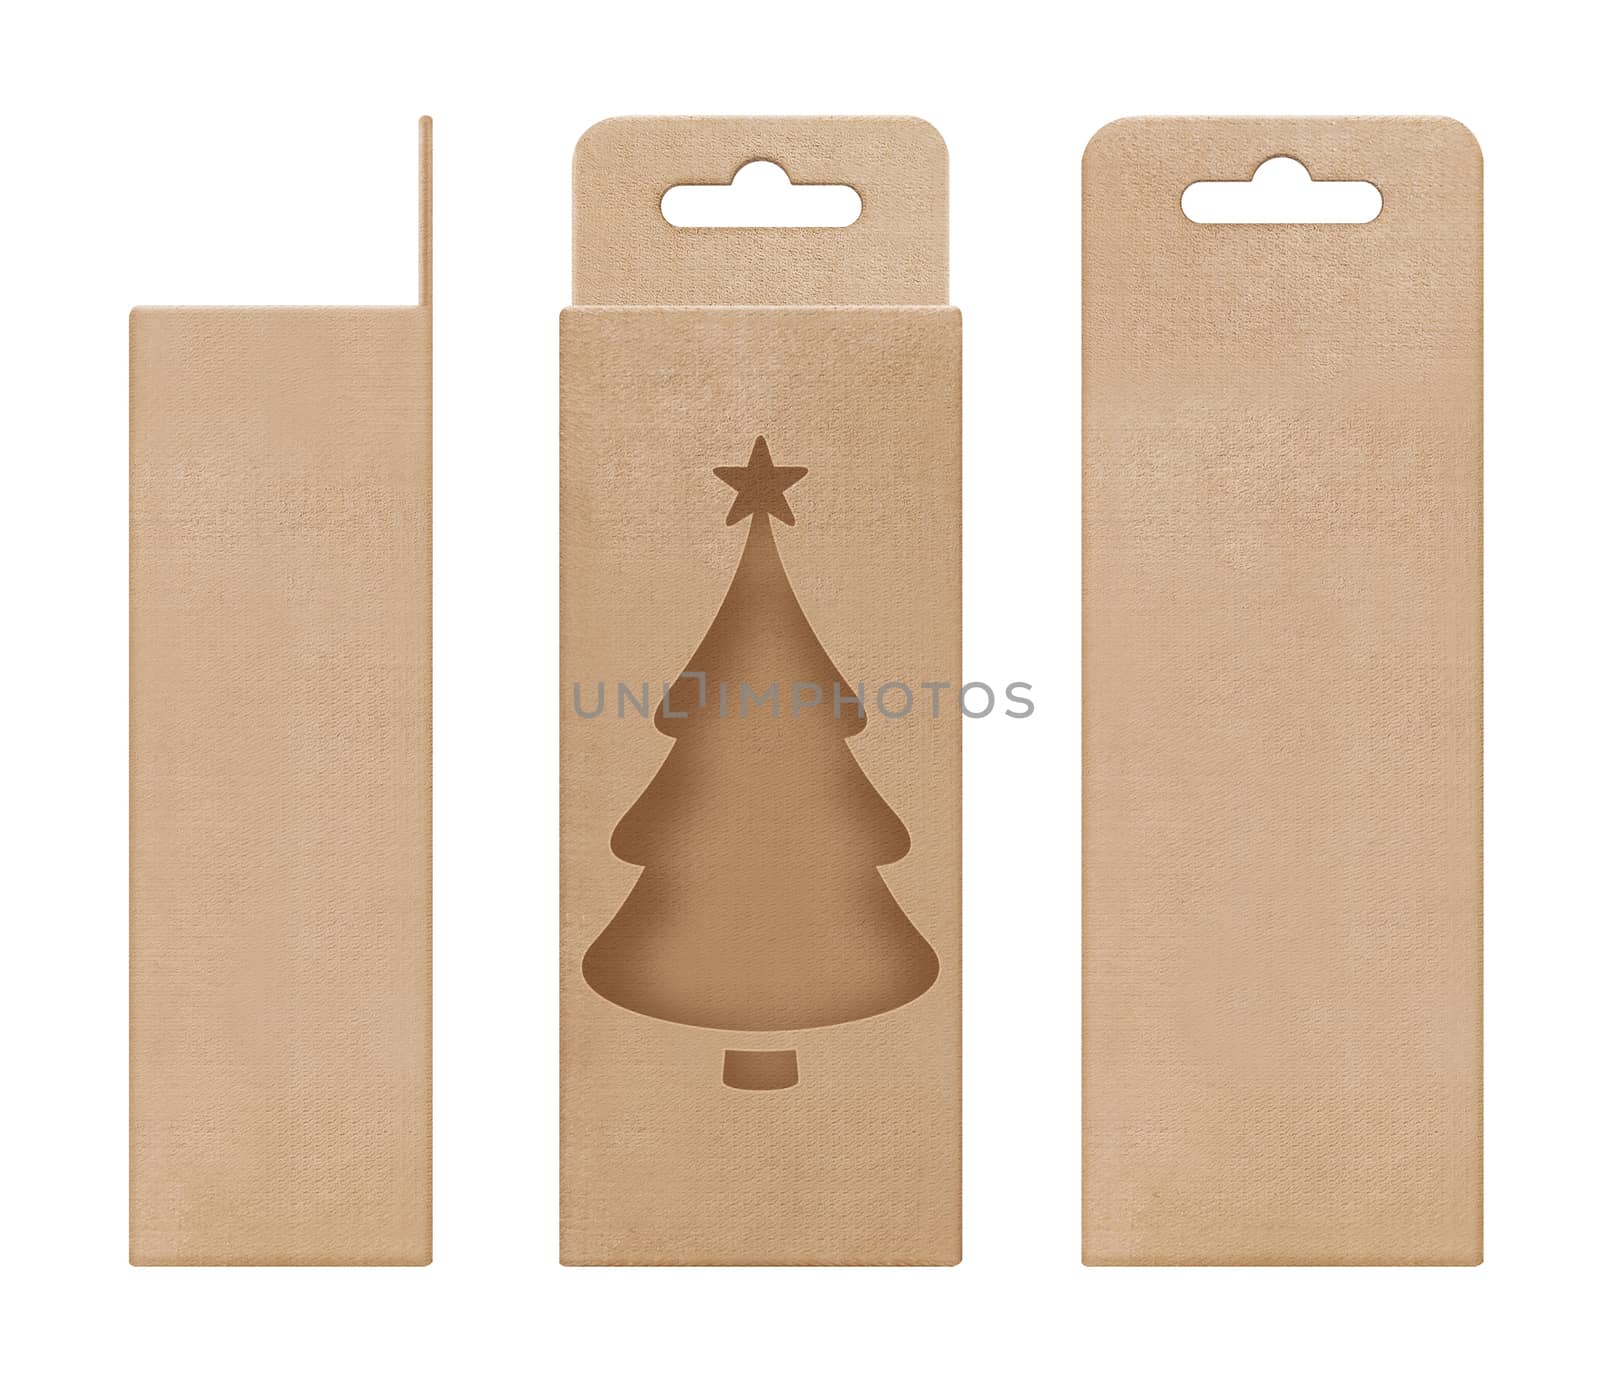 box, packaging, box brown for hanging cut out window Christmas tree shape open blank template for design product package